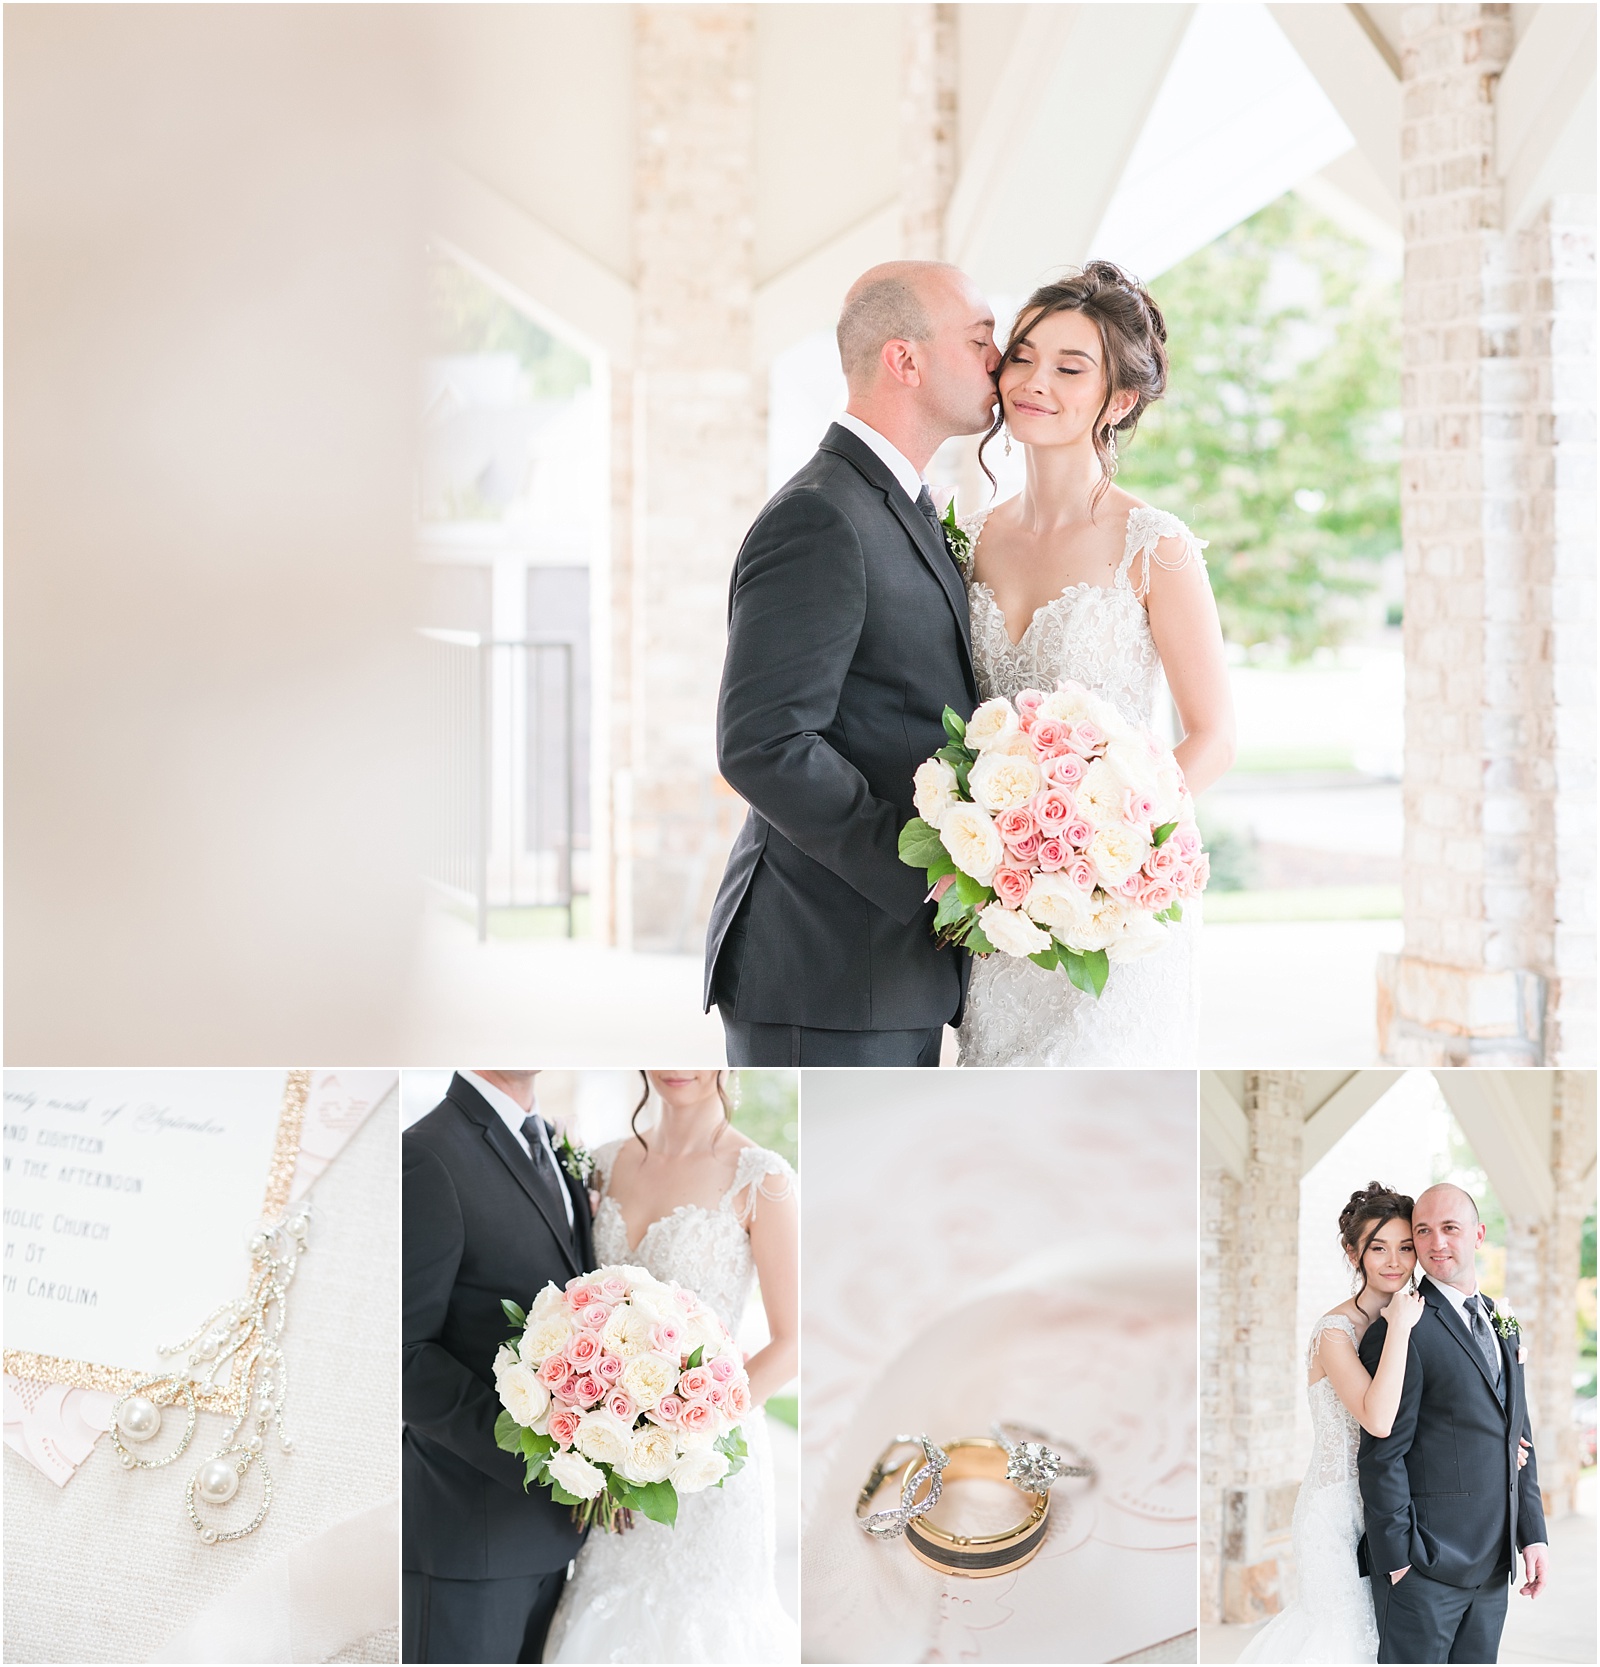 a wedding day collage with bride and groom looking at camera, bride and groom kissing, bride and groom holding wedding bouquet, bride and groom wedding rings